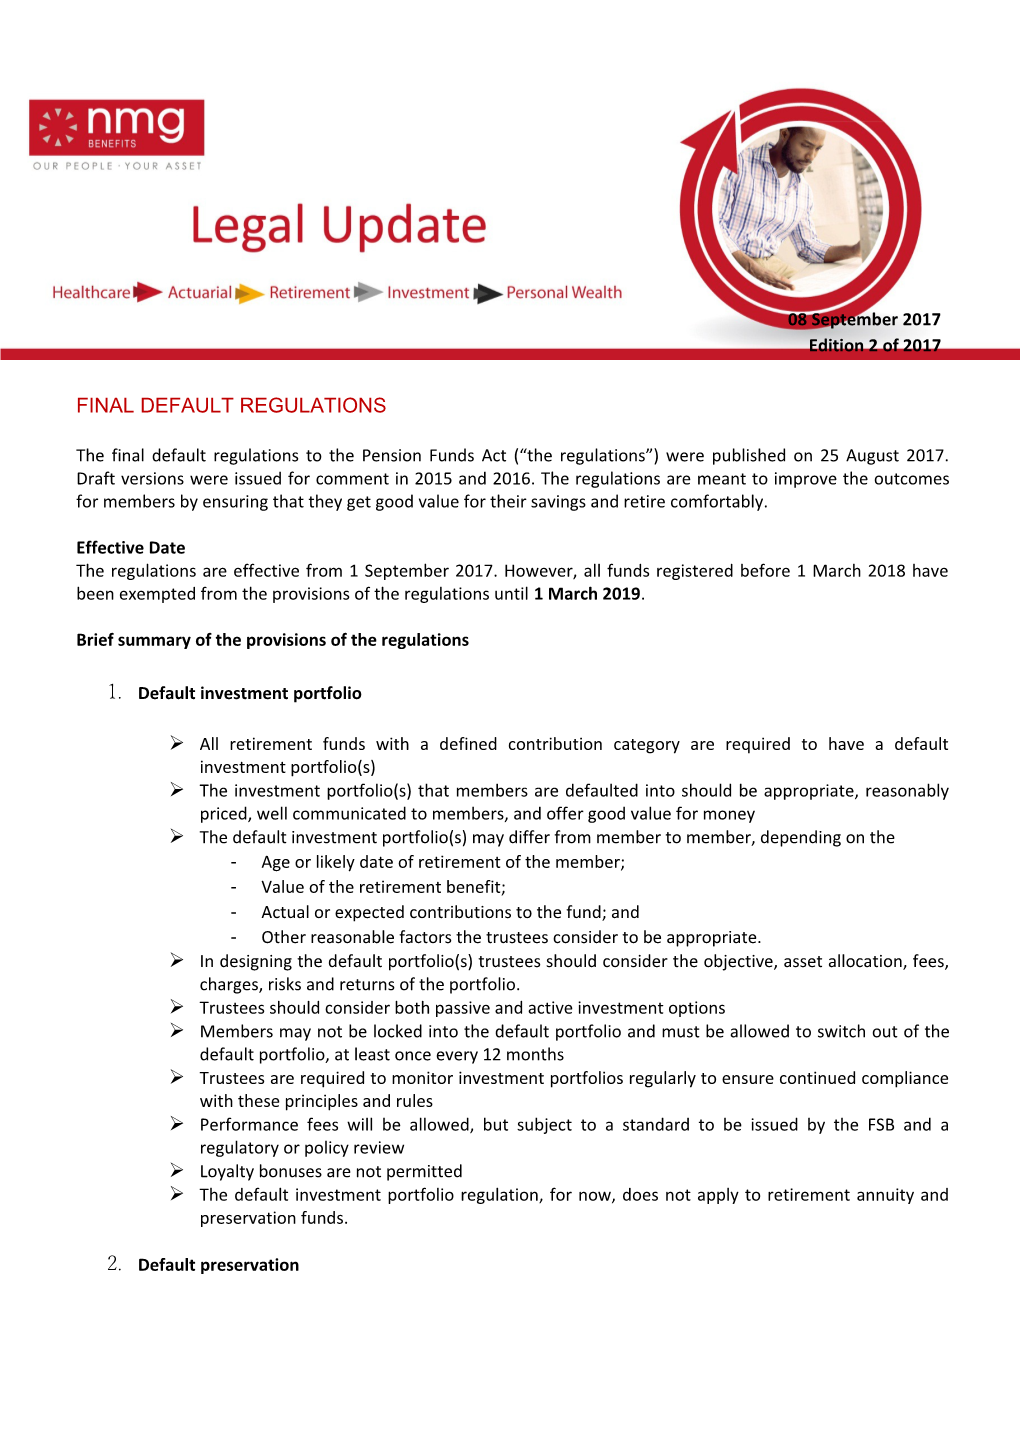 Brief Summary of the Provisions of the Regulations